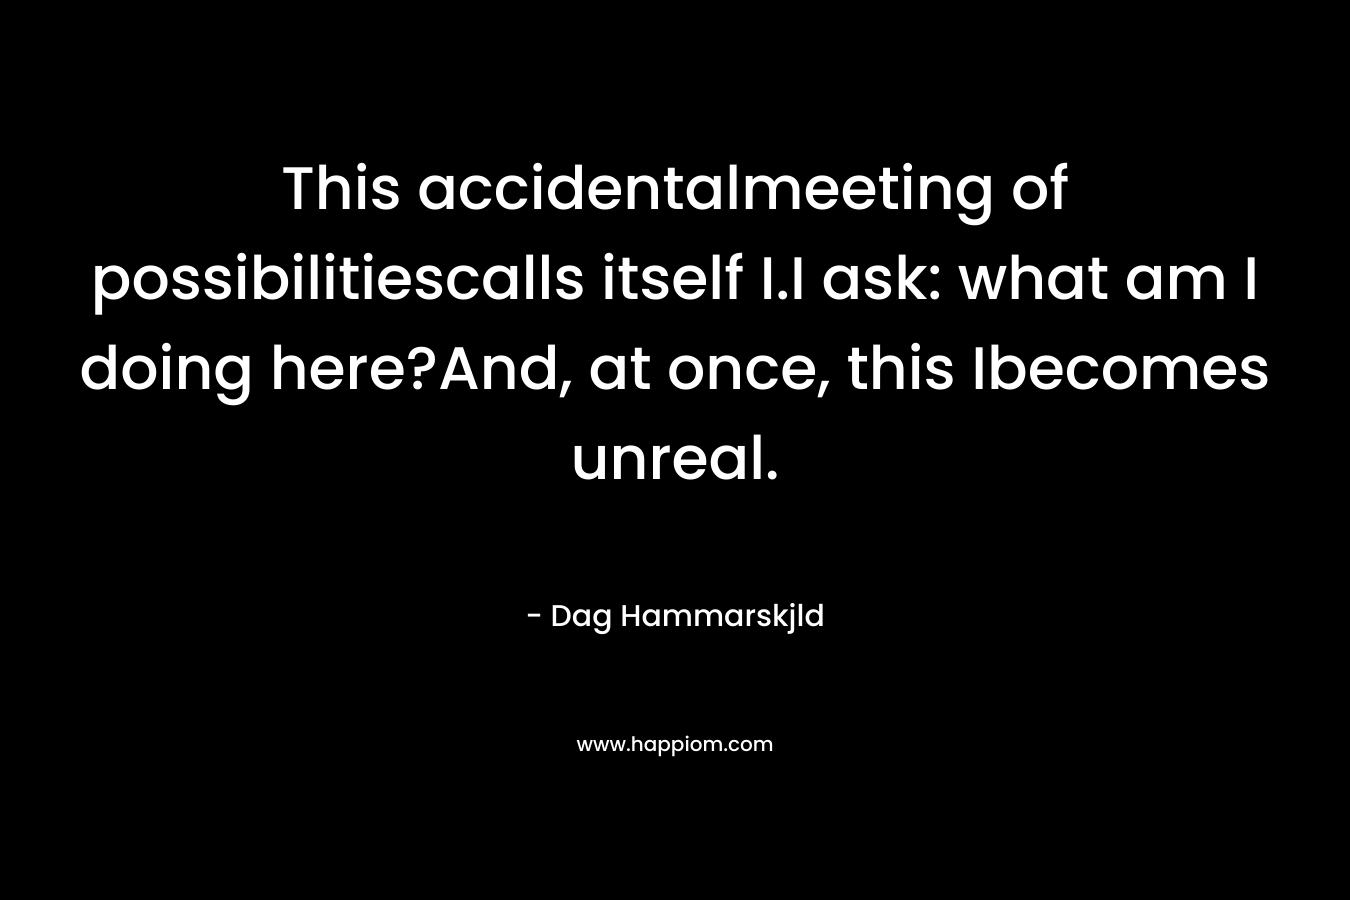 This accidentalmeeting of possibilitiescalls itself I.I ask: what am I doing here?And, at once, this Ibecomes unreal. – Dag Hammarskjld